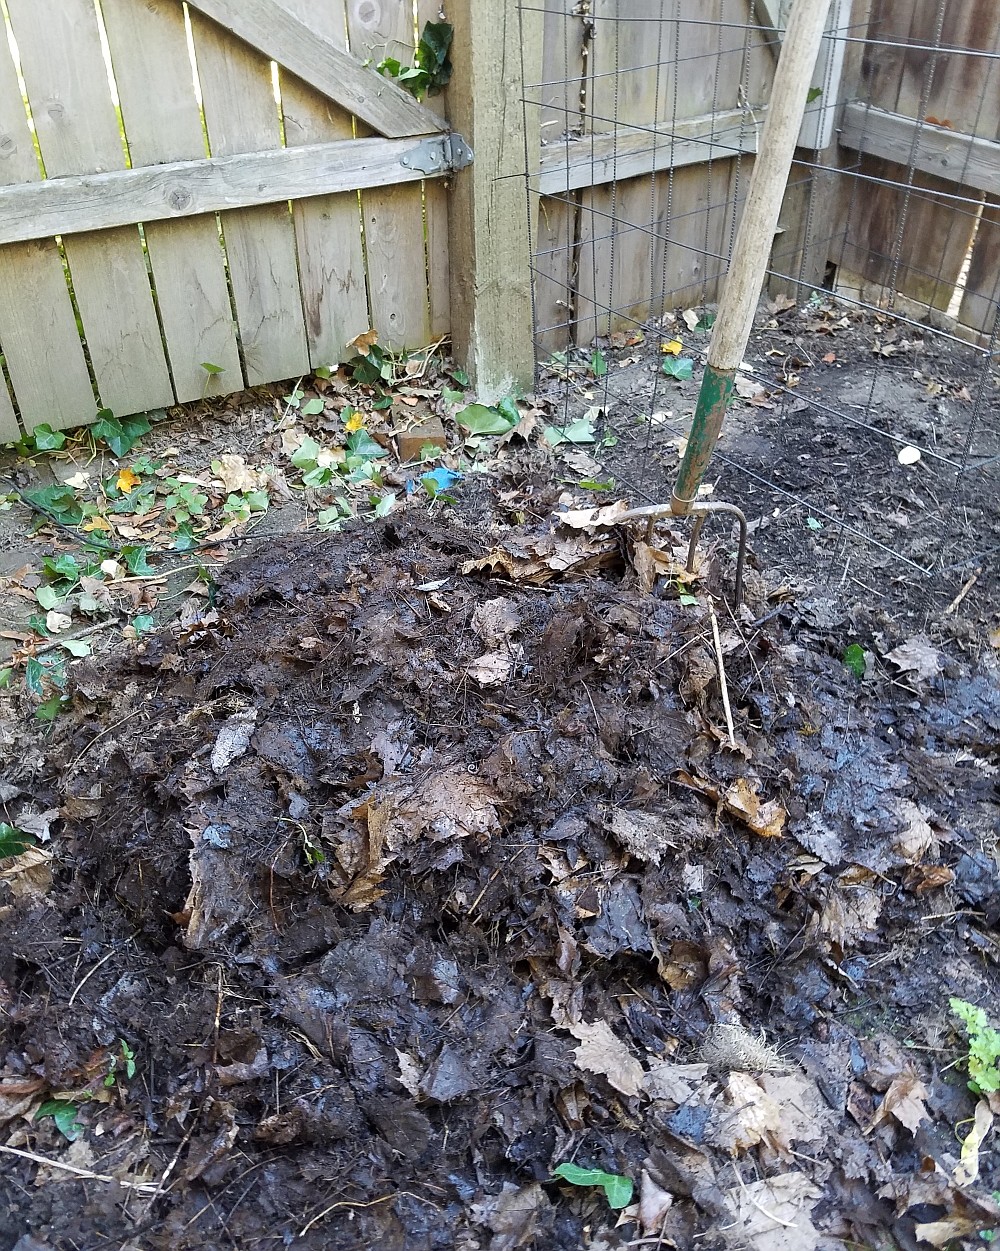 Decomposed leaves, known as leaf mold, is a wonderful soil conditioner for your garden. The best part is that it is free!